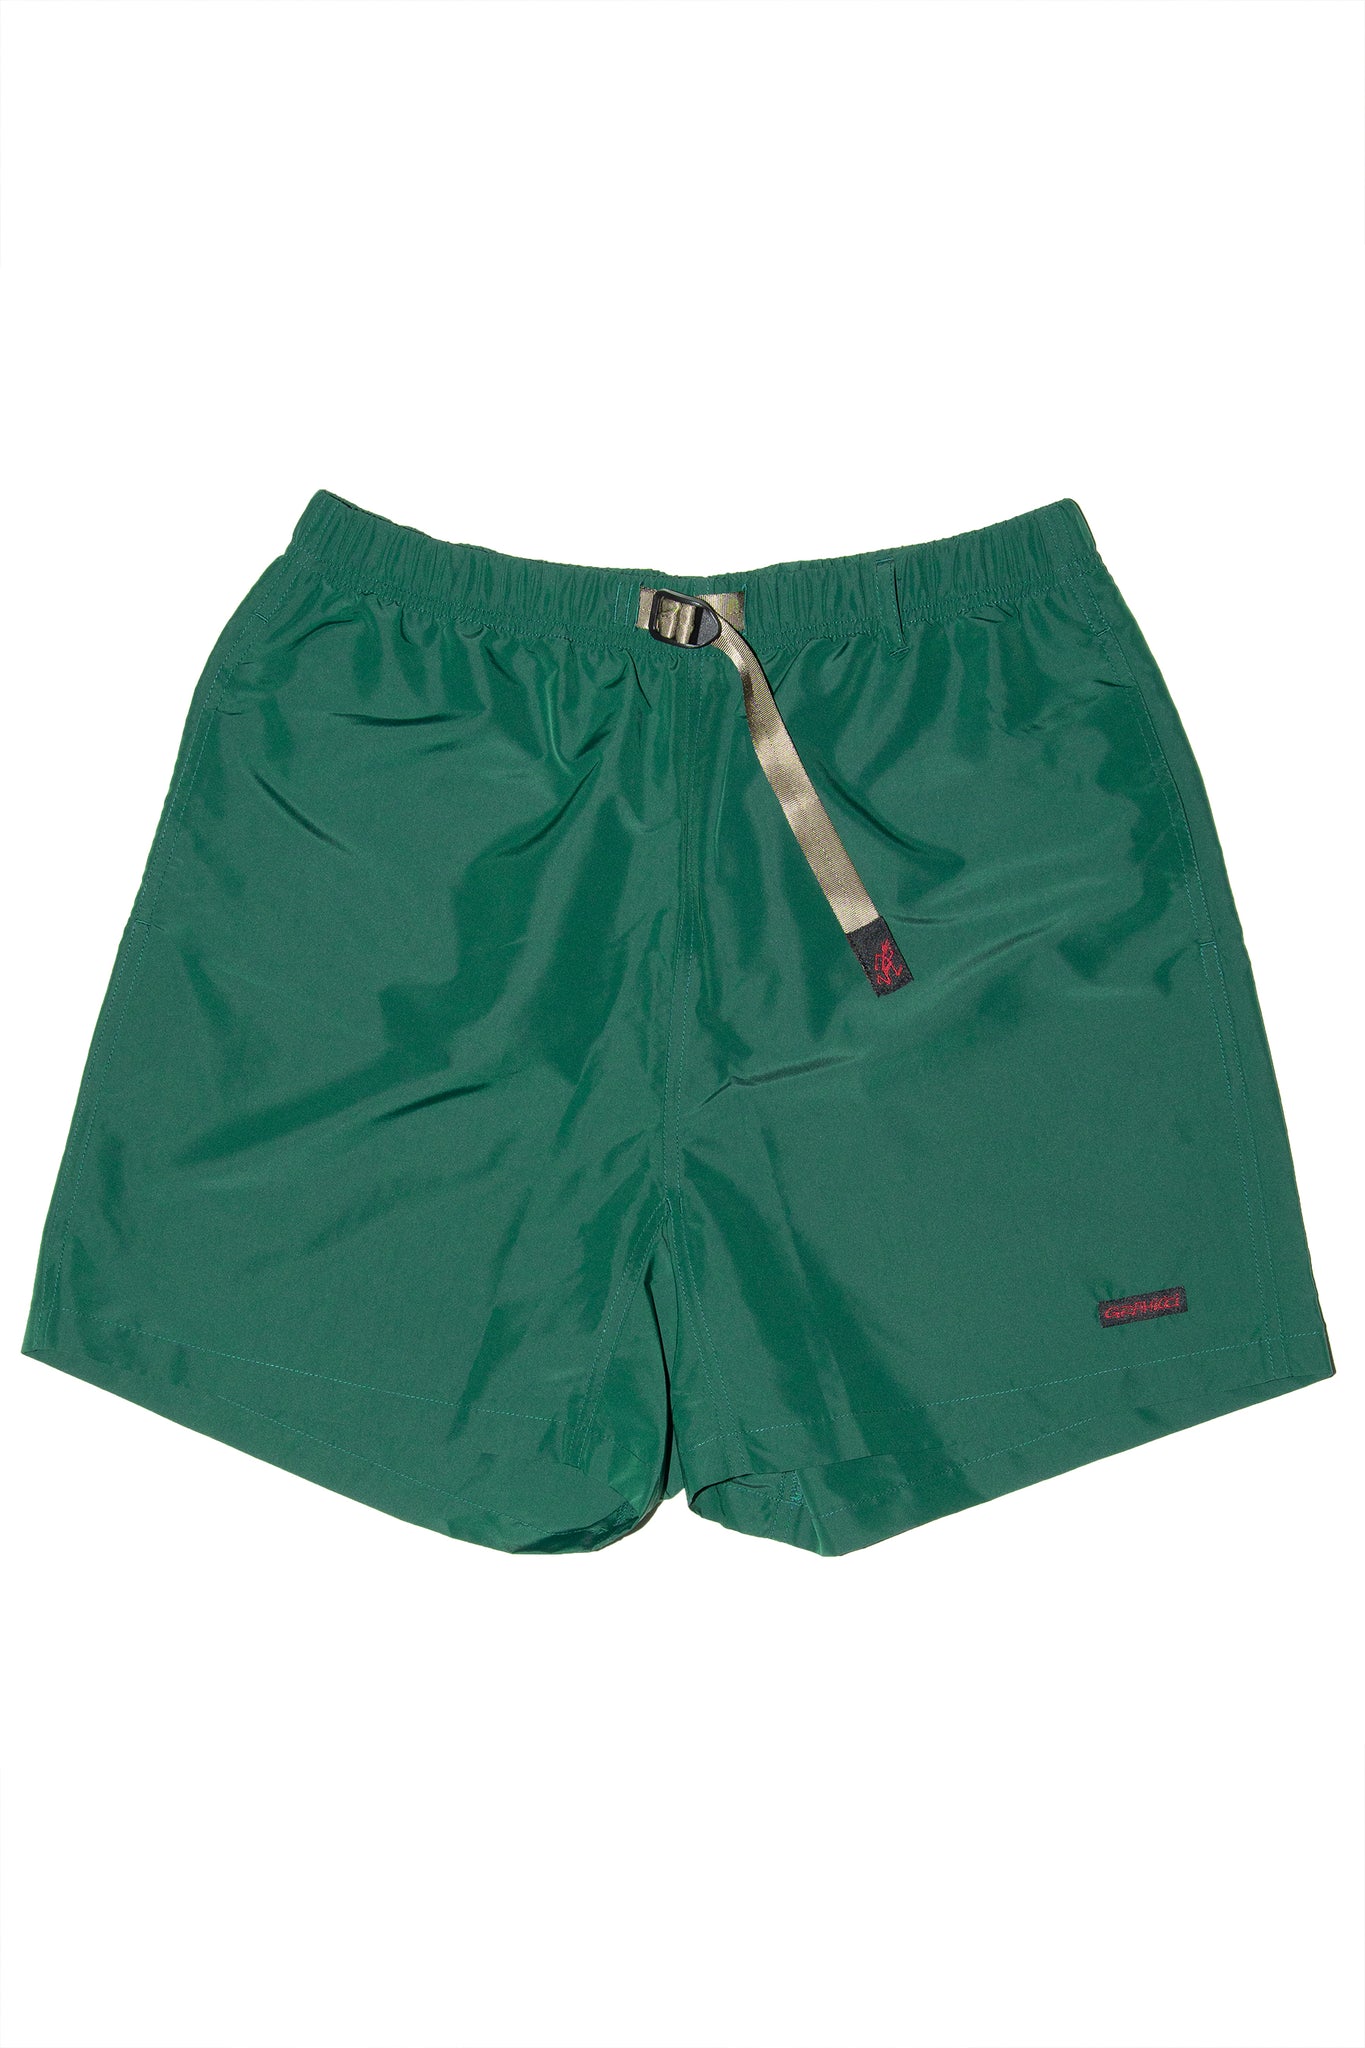 understory-shop - GRAMICCI - SHELL CANYON SHORT